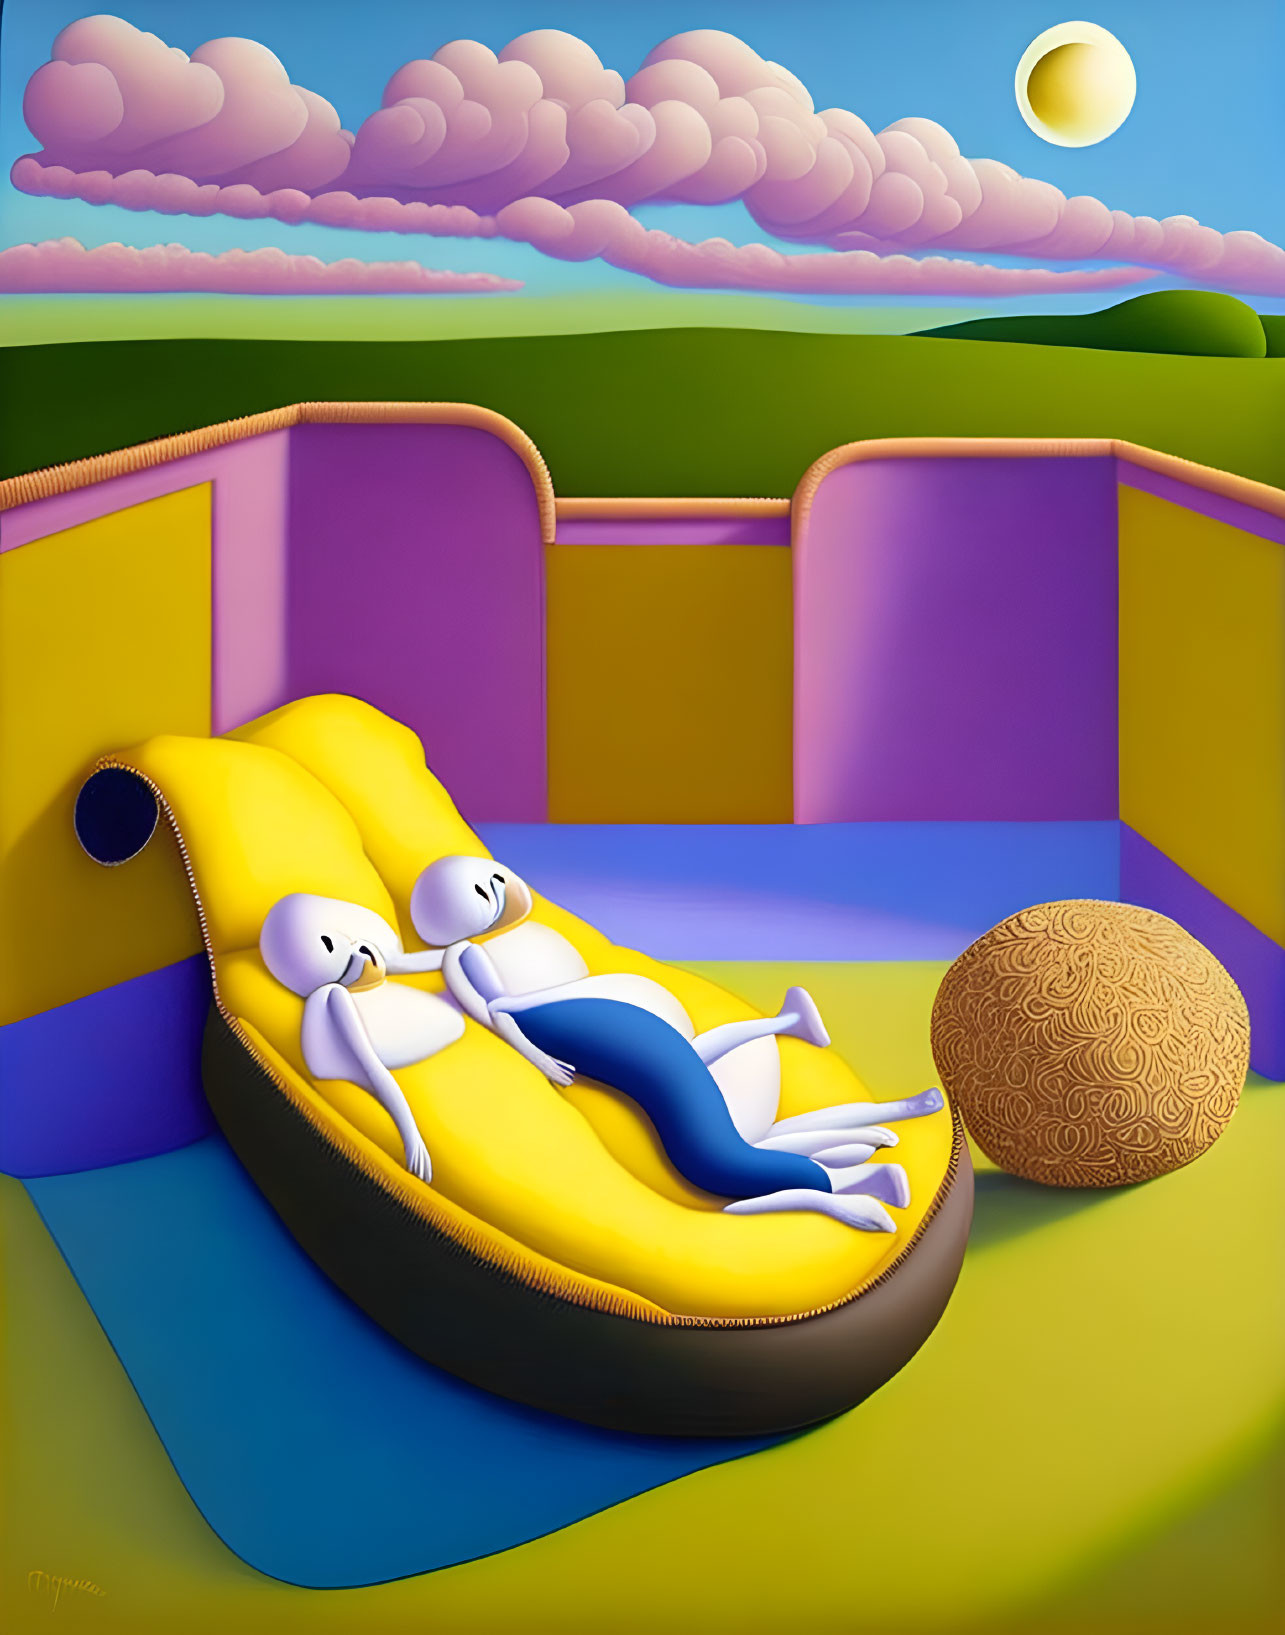 Colorful surreal landscape with stylized characters on yellow sofa in front of round patterned object